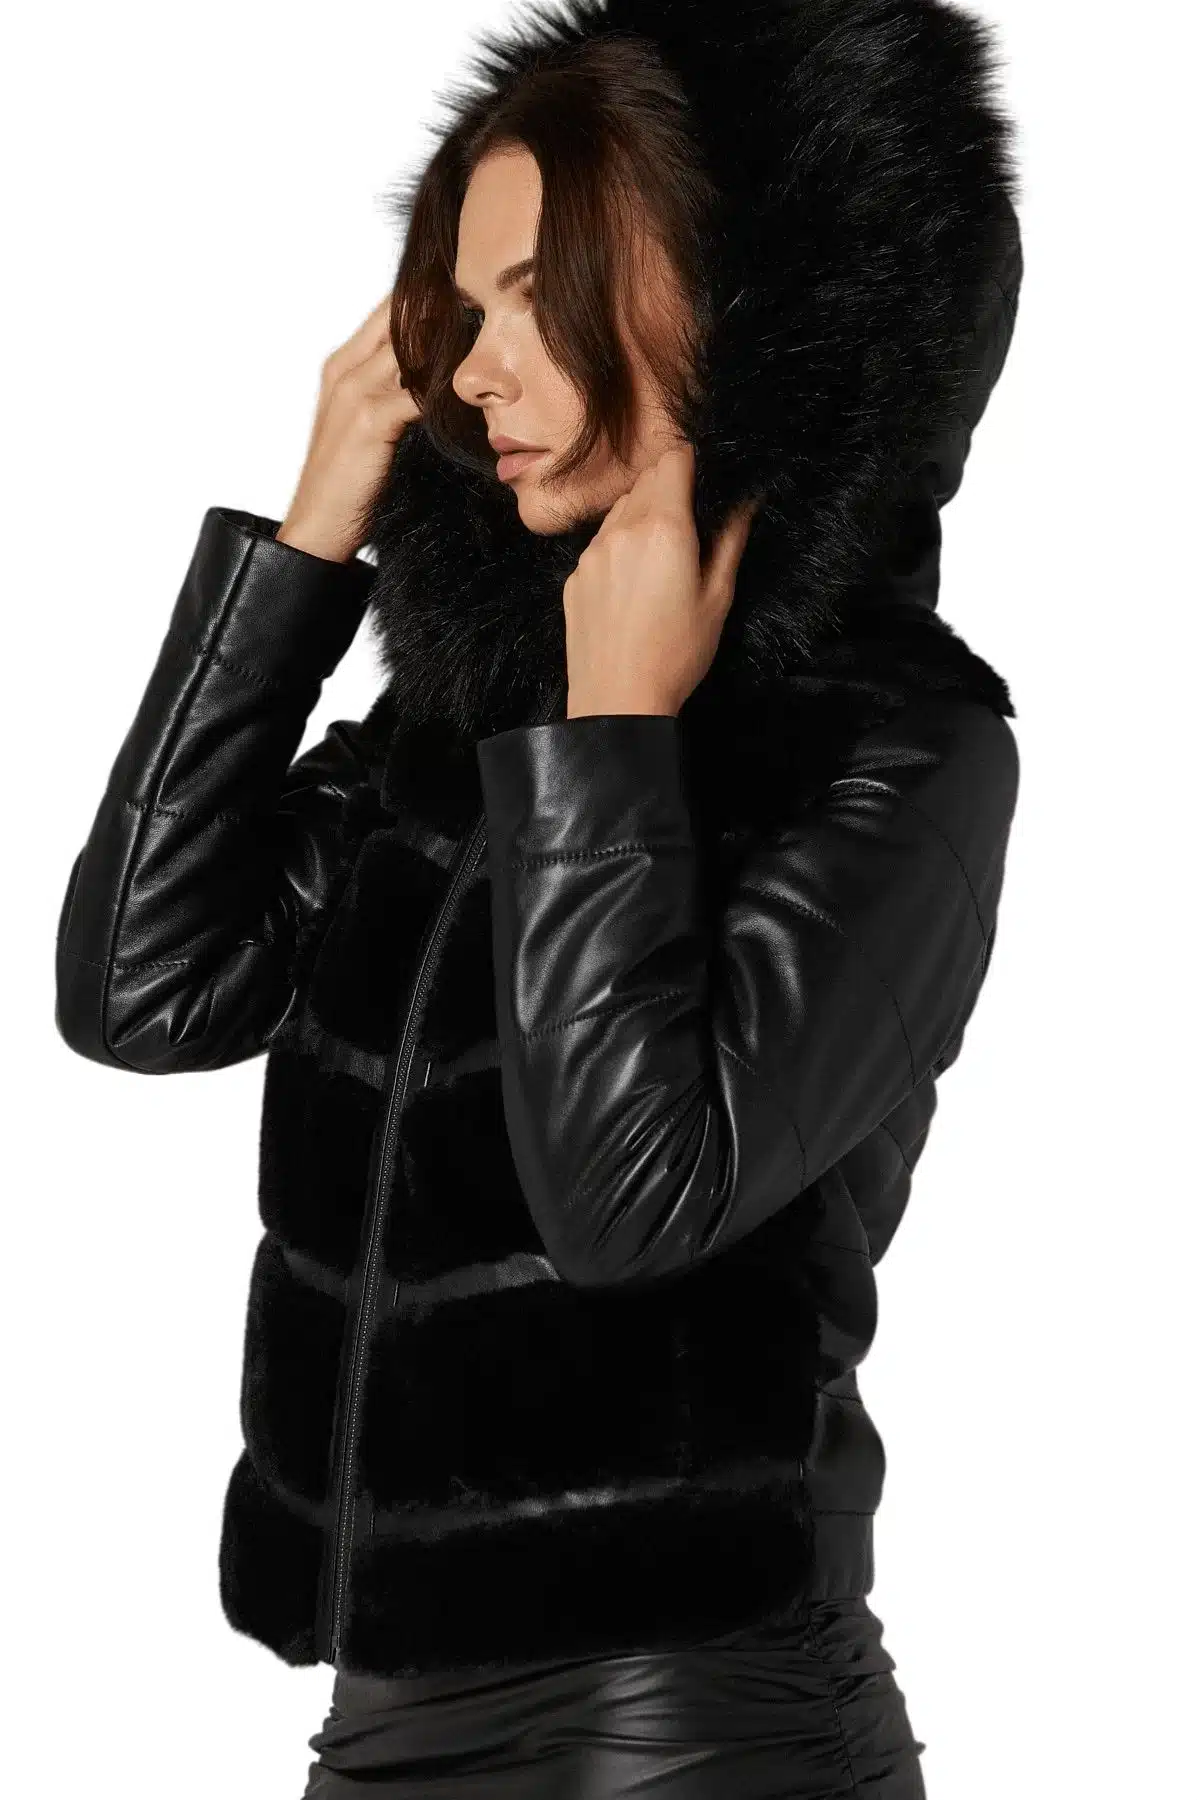 Classy-Black-Womens-Leather-Jacket-(3)-transformed_result